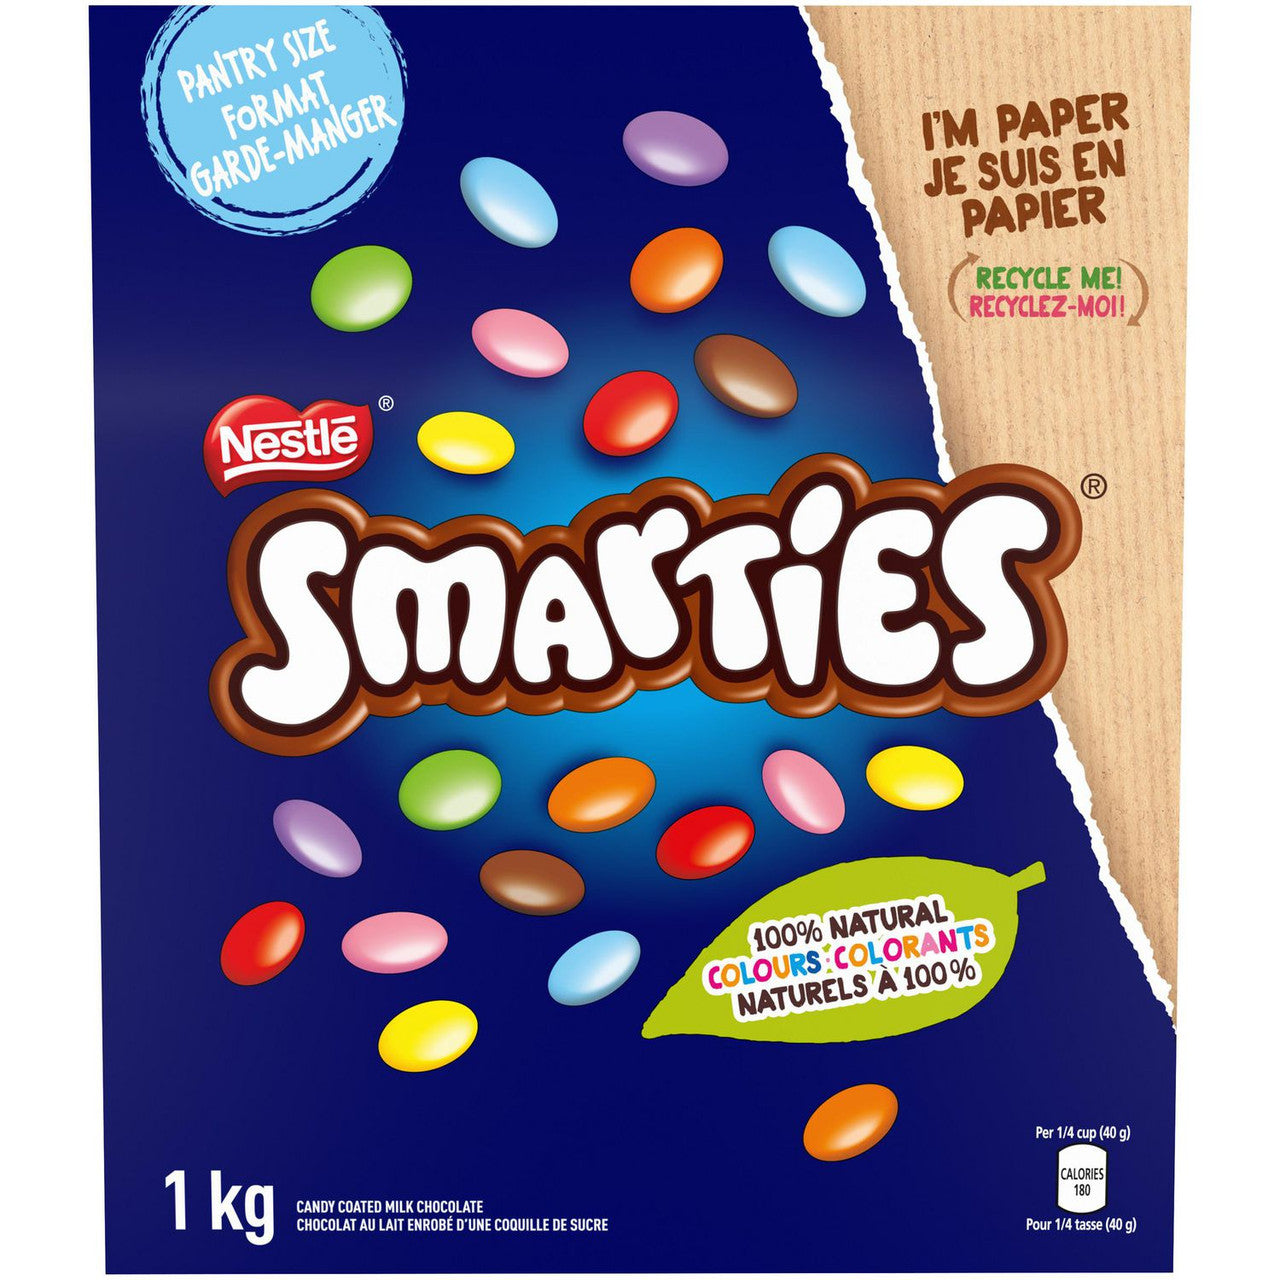 Nestle Chocolate Smarties Pantry Size 1kg/2.2lb Paper Bag, {Imported from Canada}